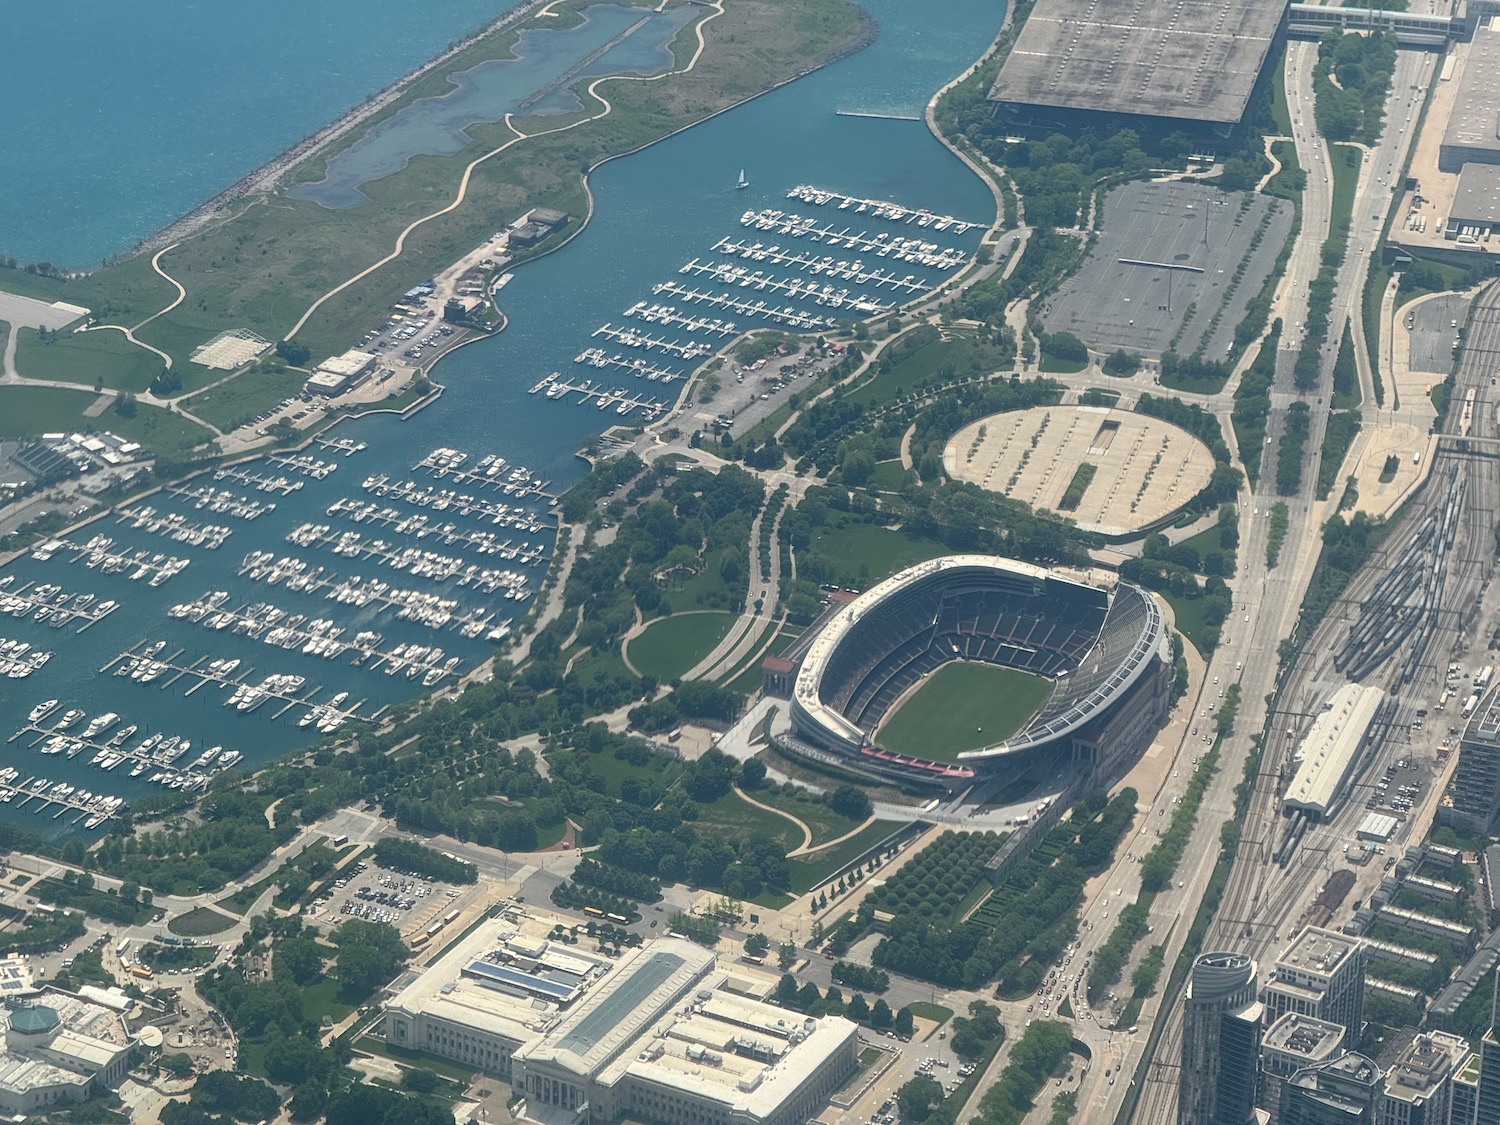 an aerial view of a stadium and a body of water